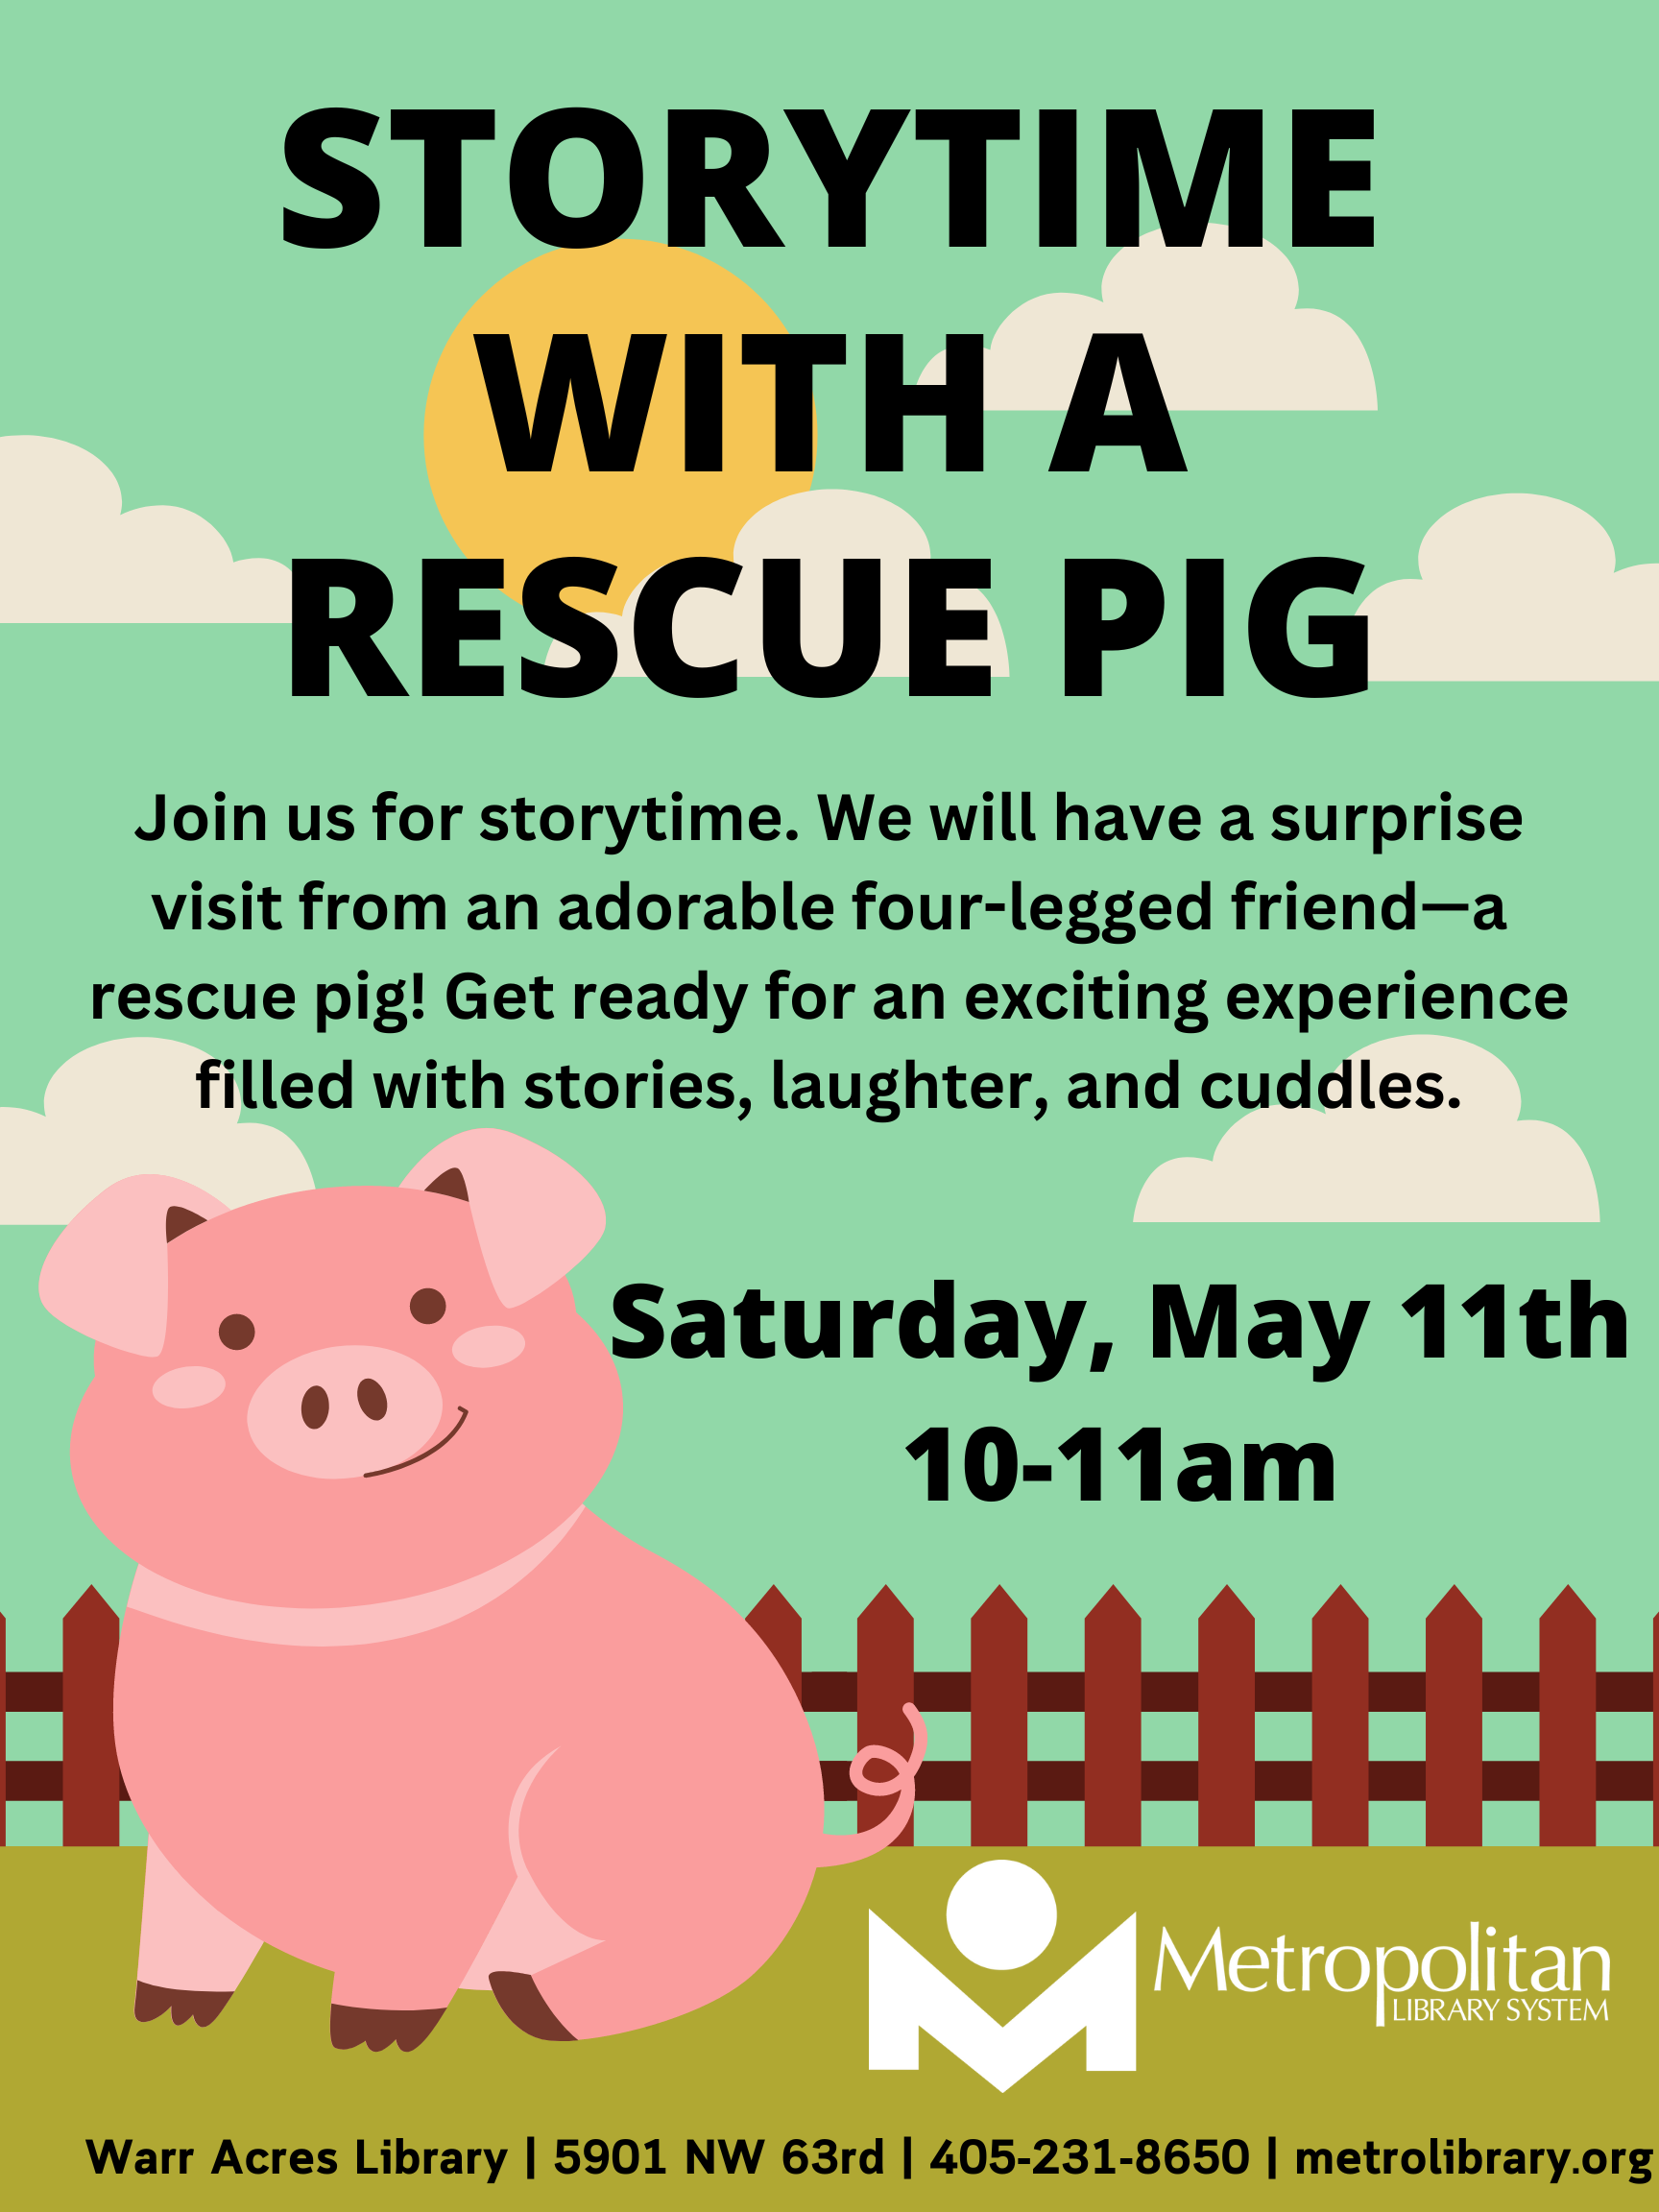 Storytime with a Rescue Pig